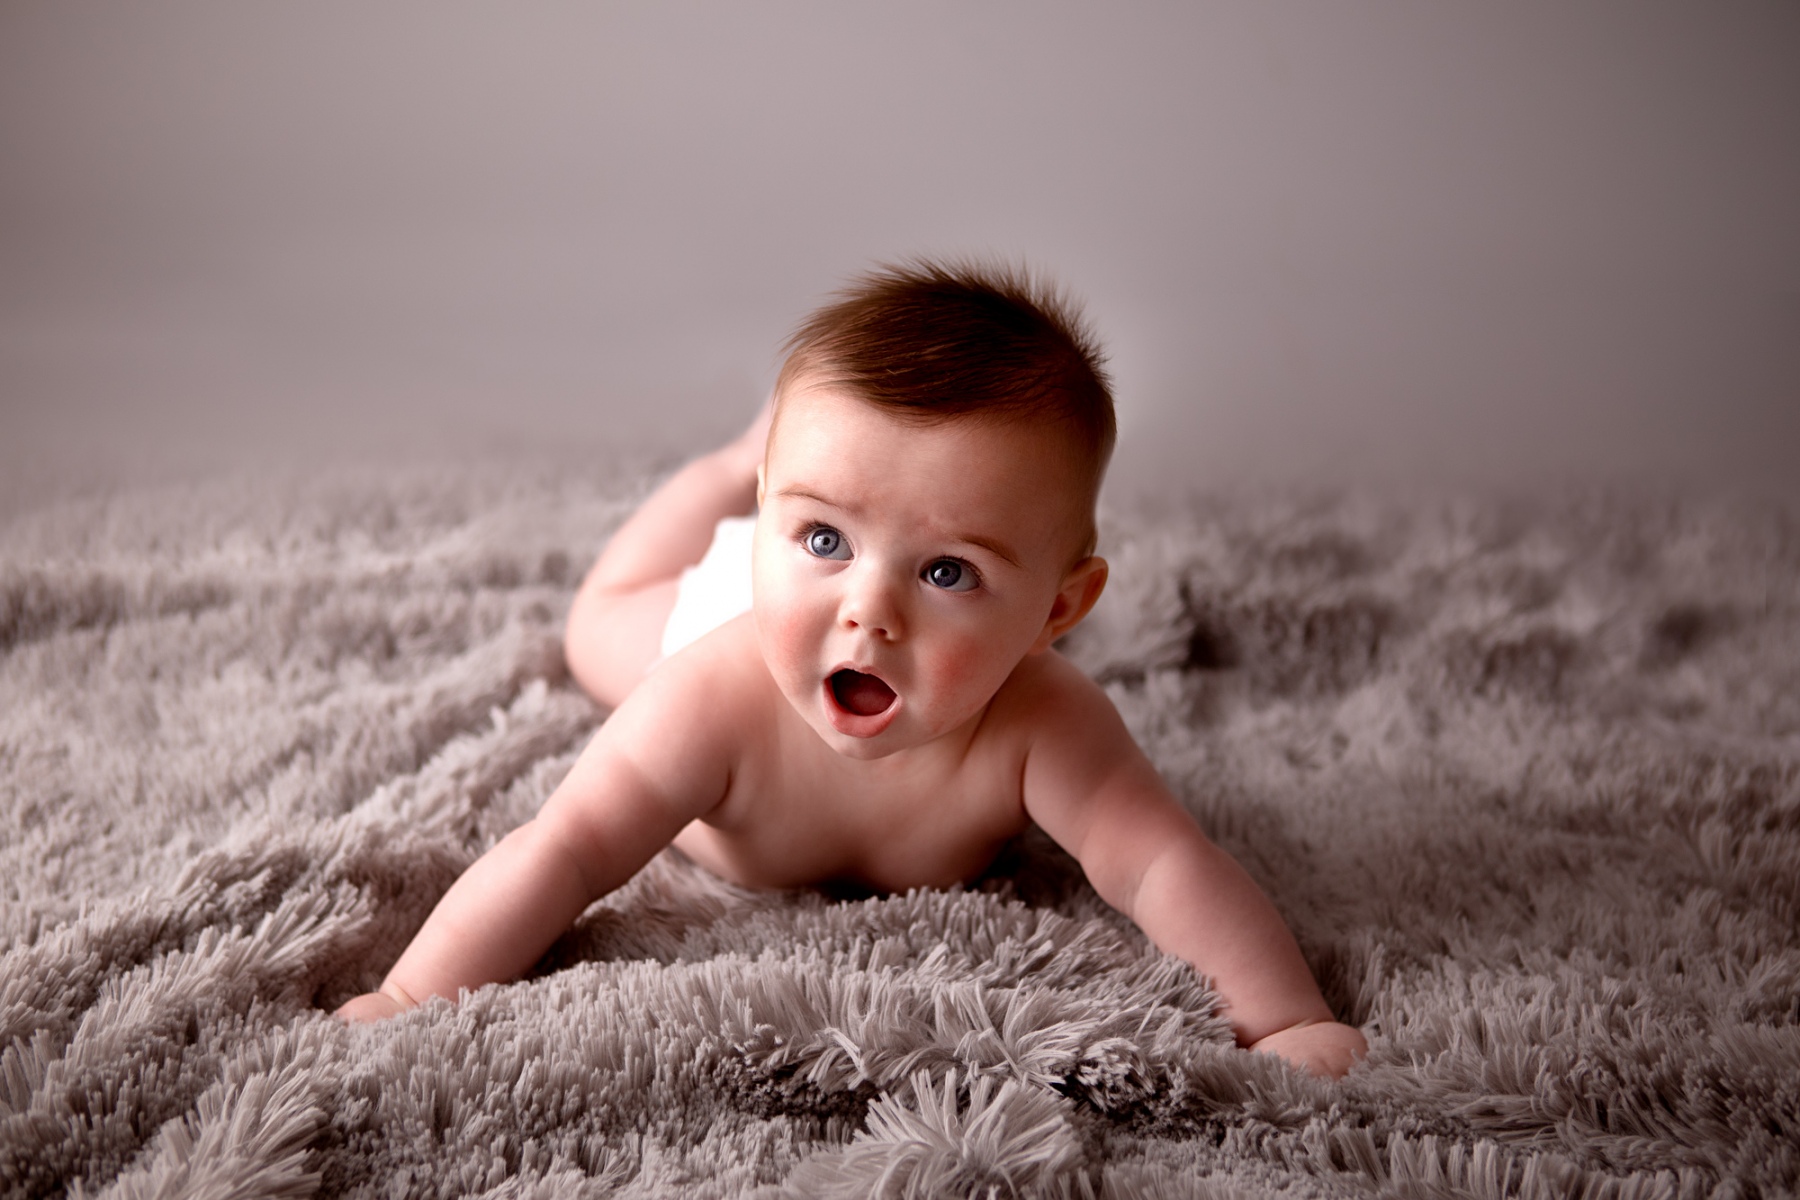 Little Boy Poses in studio stock image. Image of poses - 128847133